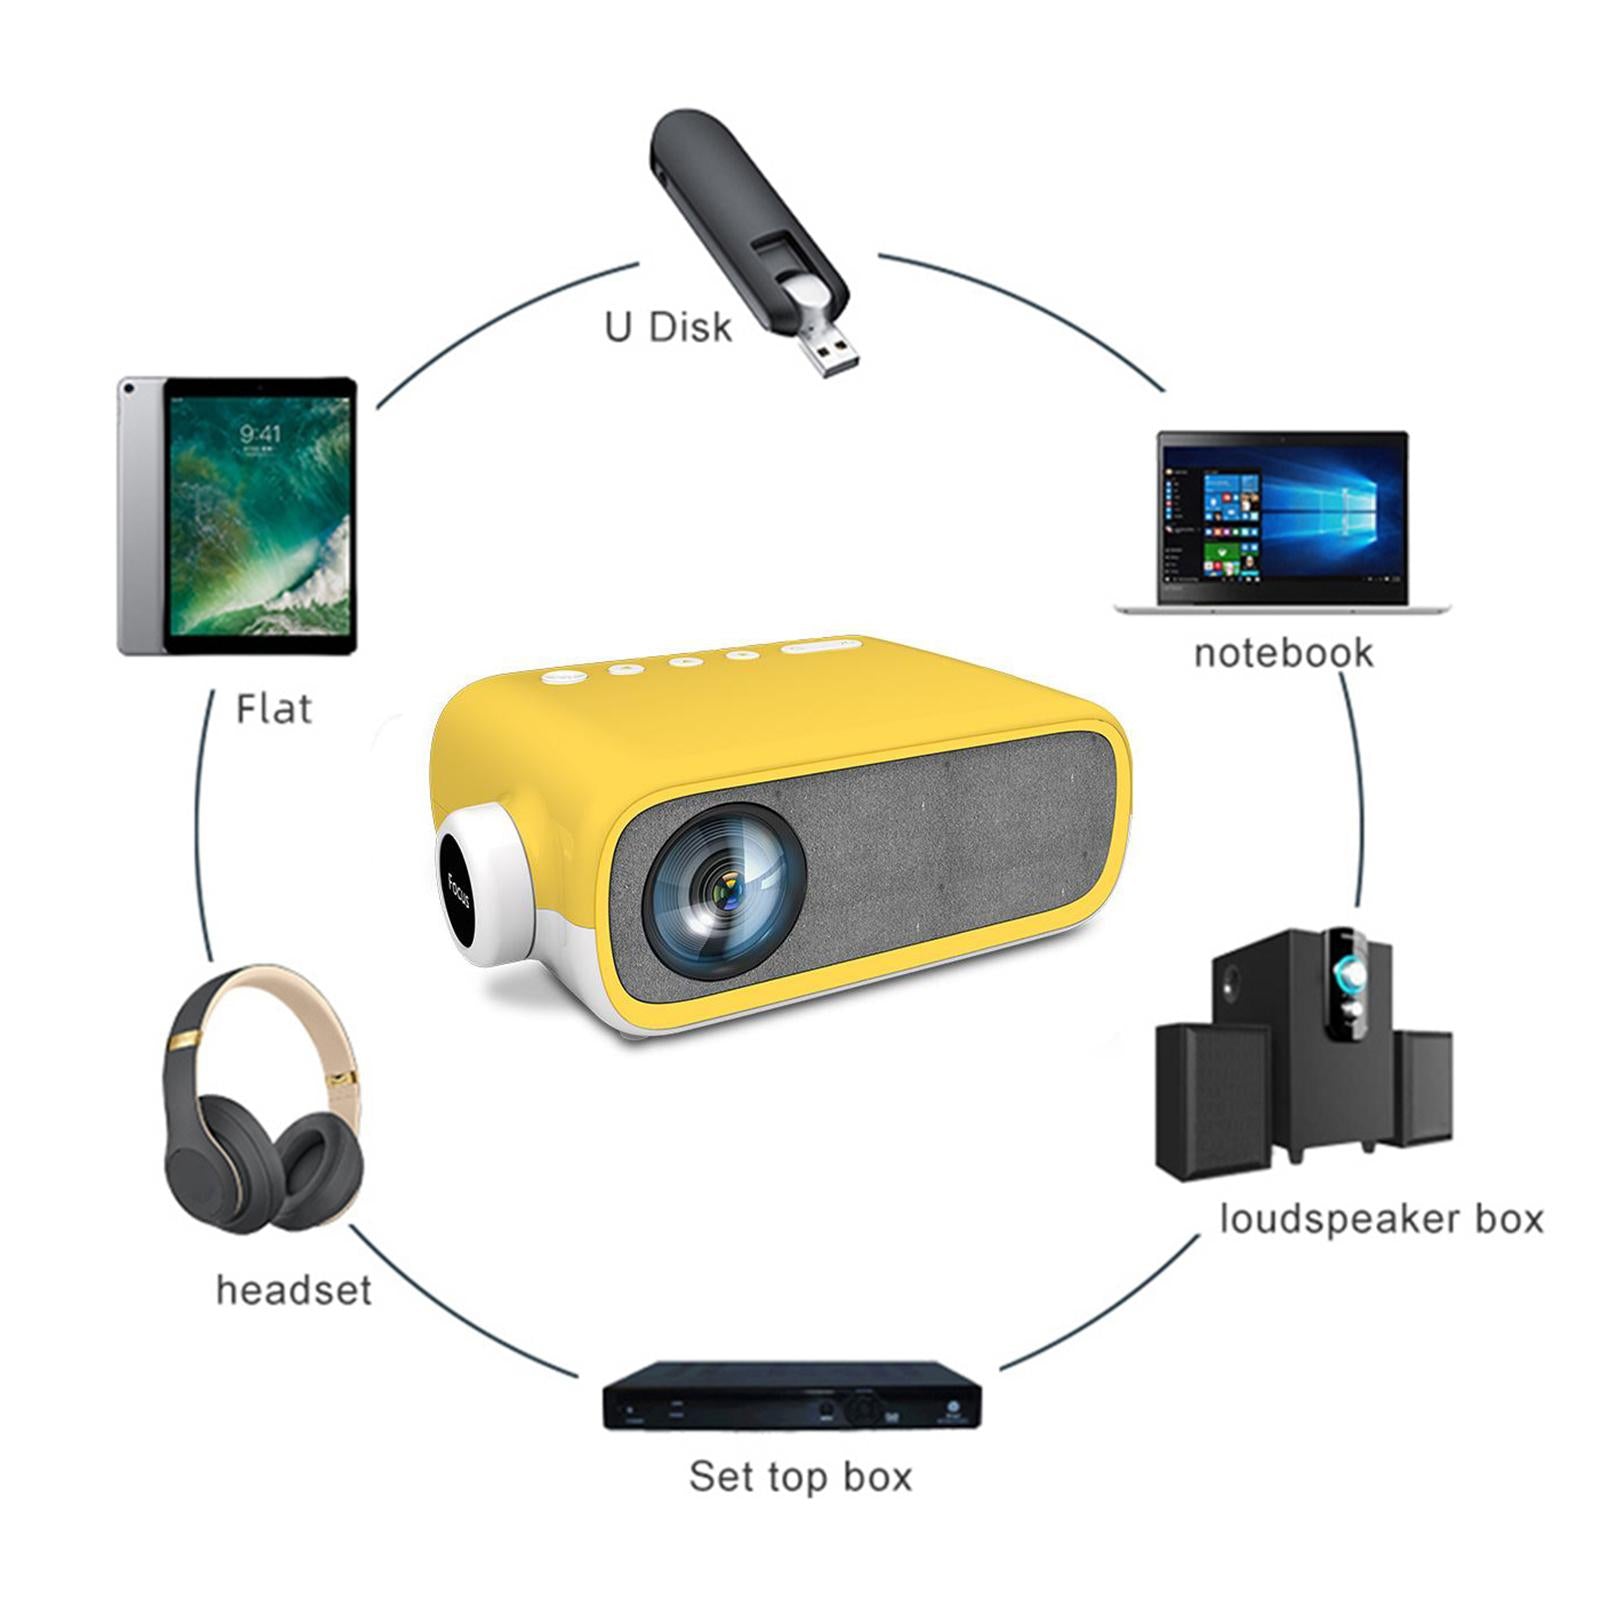 YG280 Mini Projector 1080P 80'' Supported with LED HDMI AV USB AUX EU Yellow